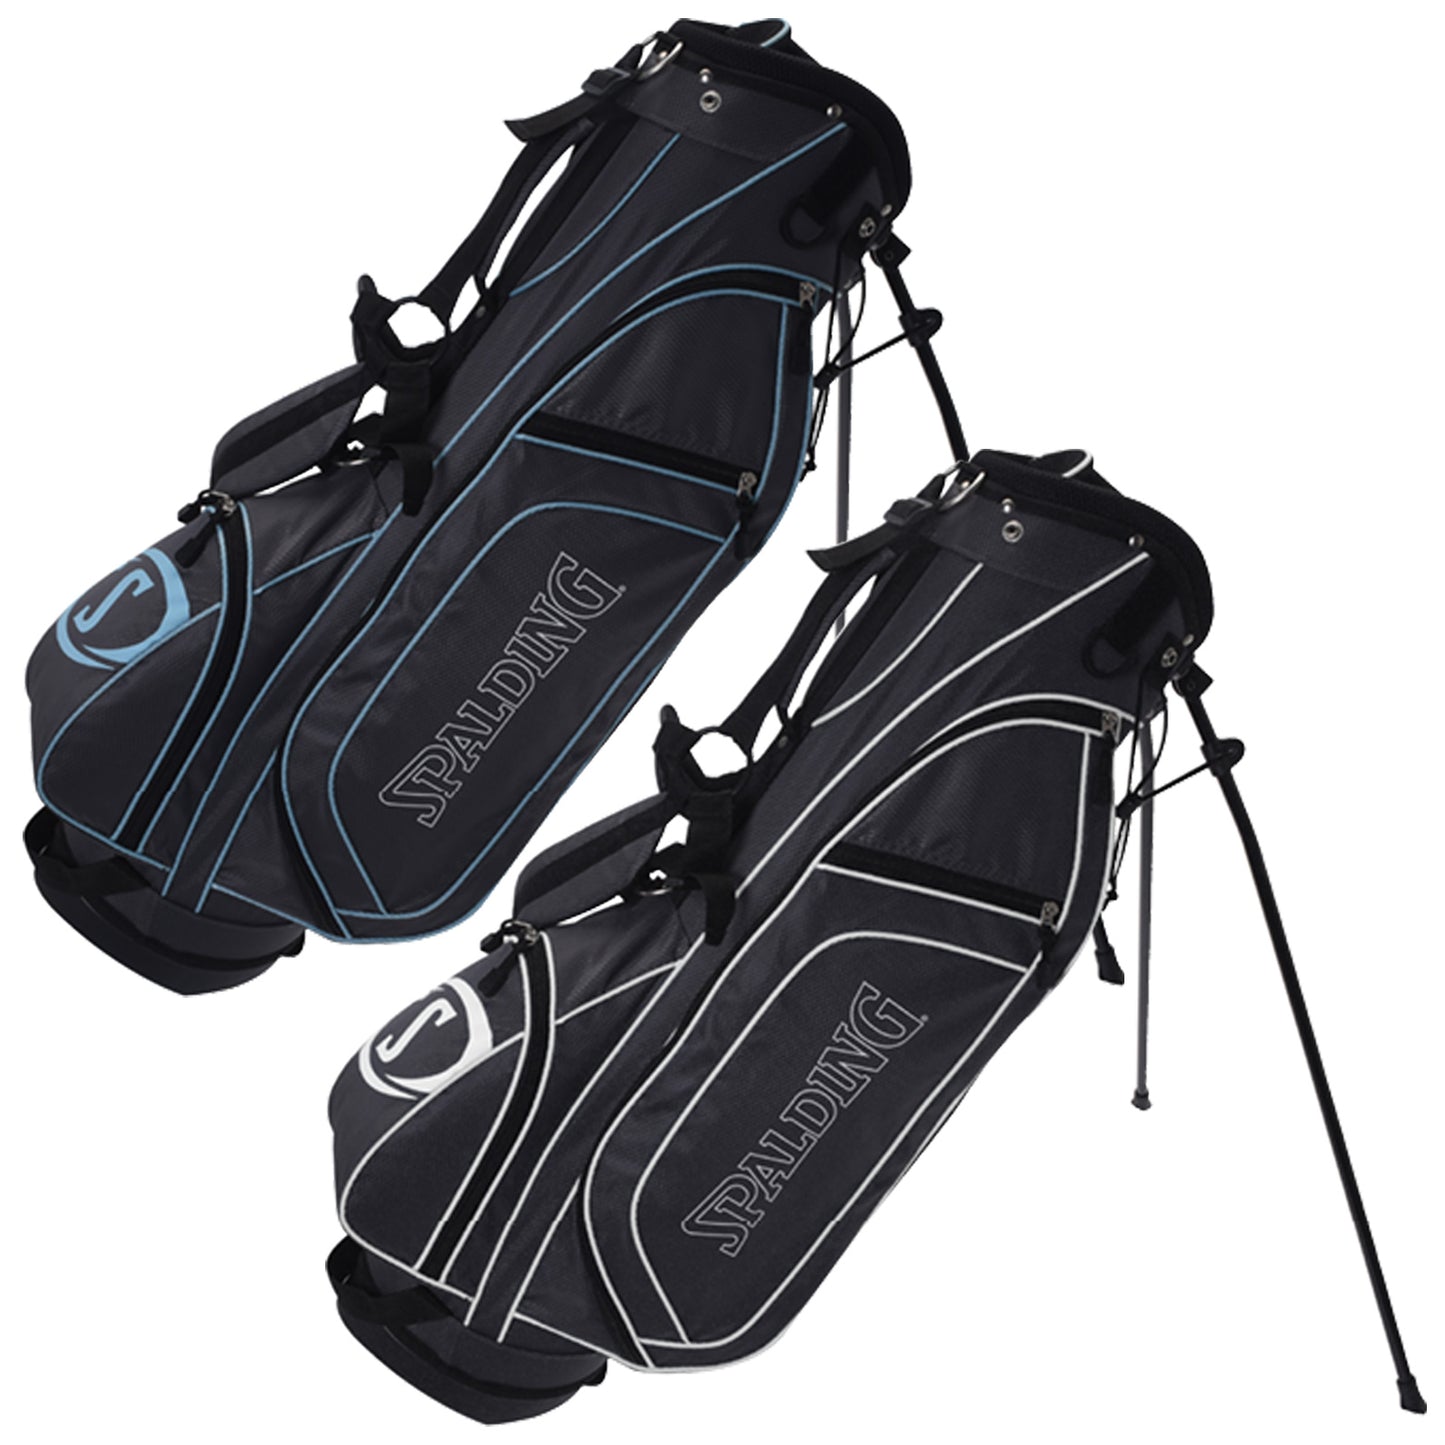 Spalding SX35 6" Stand Bag